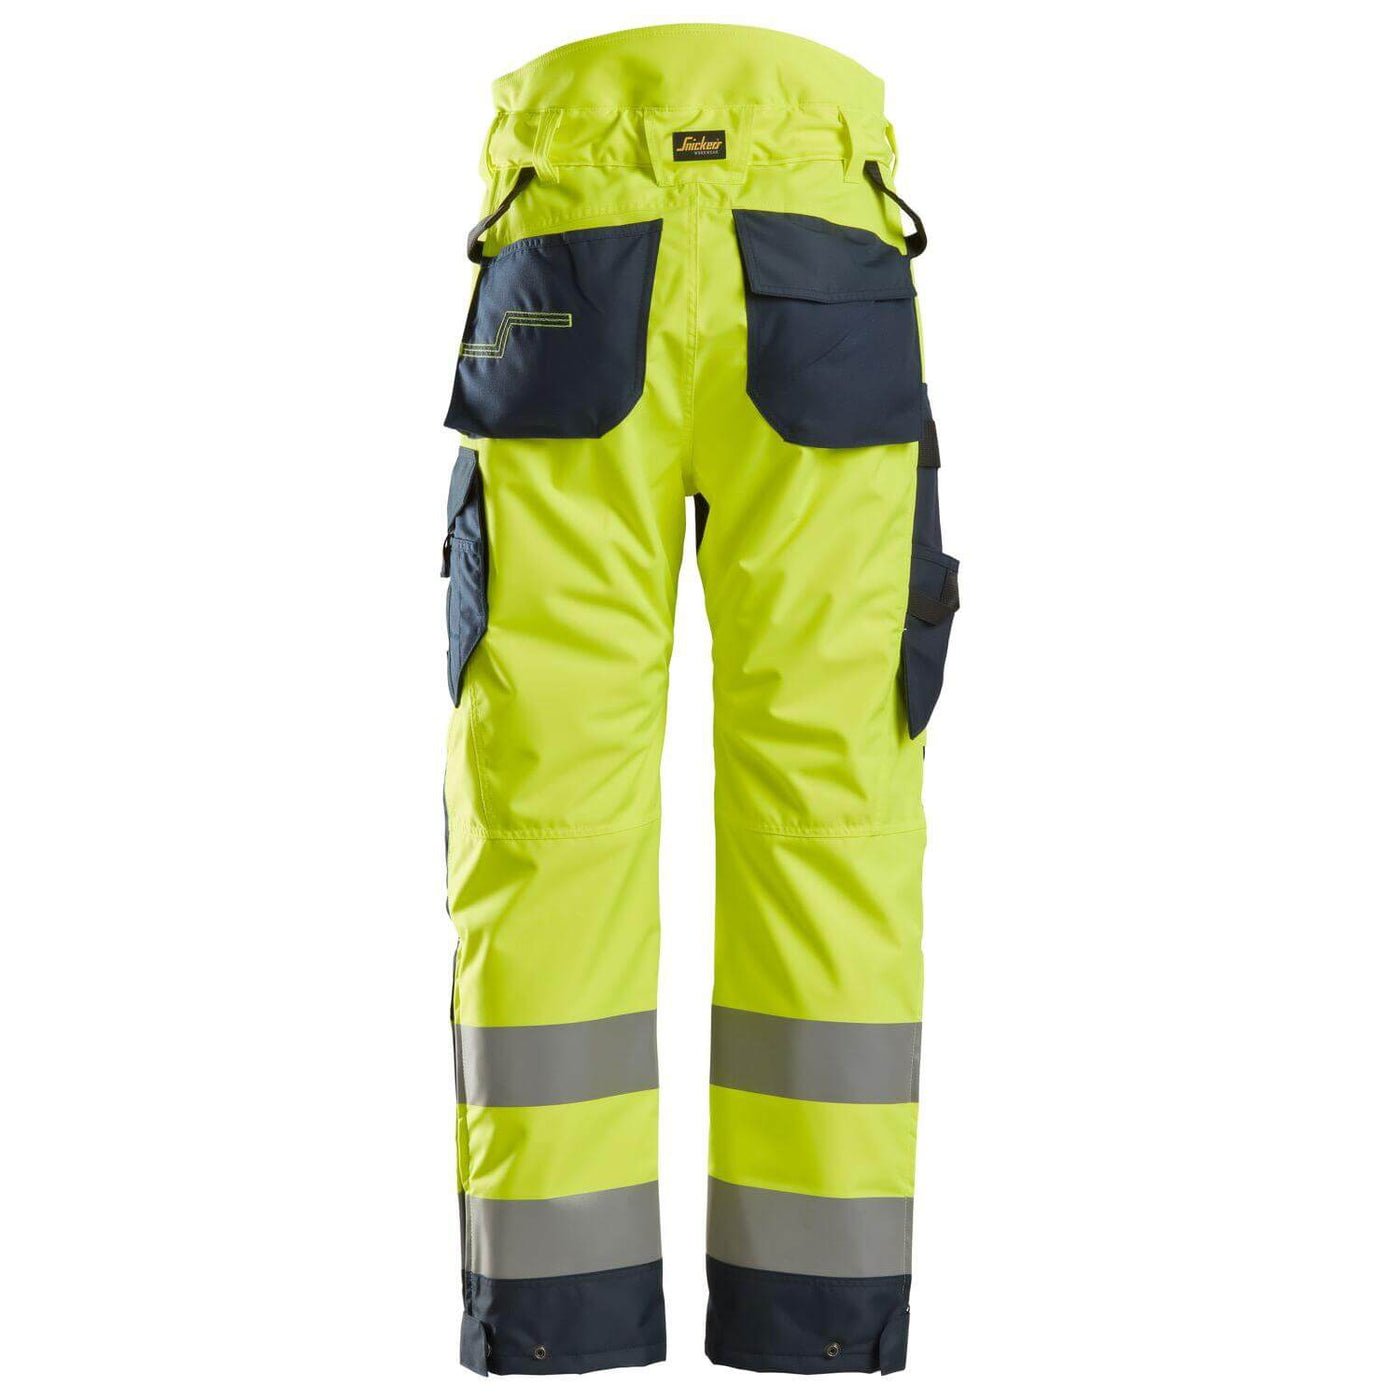 Snickers 6639 Hi Vis 37.5 Insulated Winter Trousers Class 2 Hi Vis Yellow Navy Blue back #colour_hi-vis-yellow-navy-blue